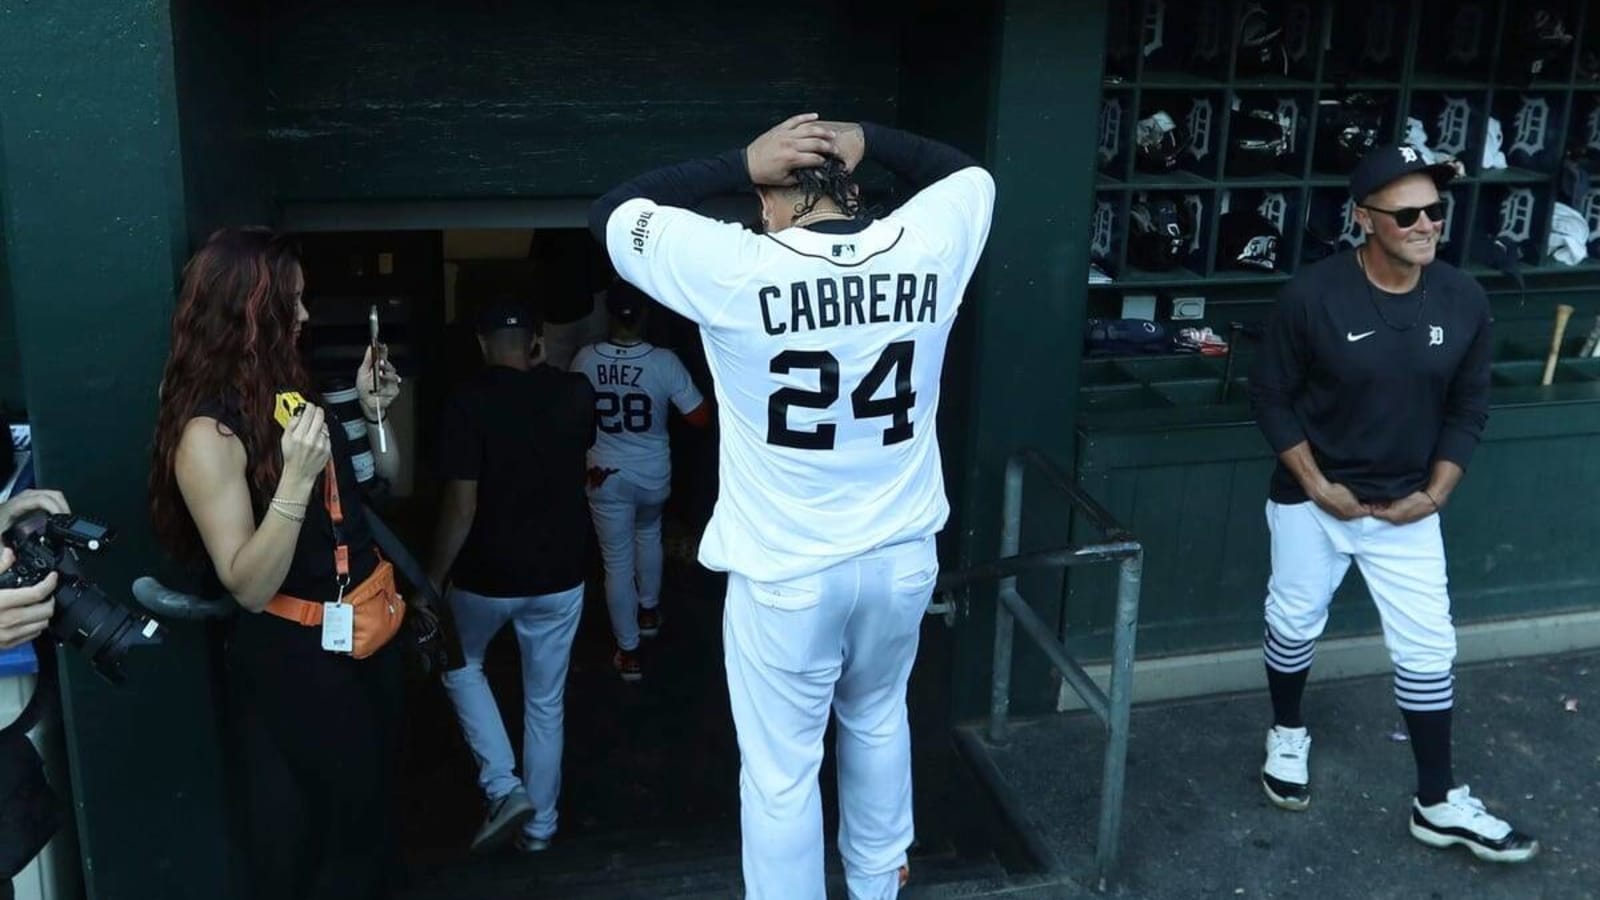 Surefire Hall of Famer Miguel Cabrera Got an Awesome Sendoff From Detroit Tigers, Fans